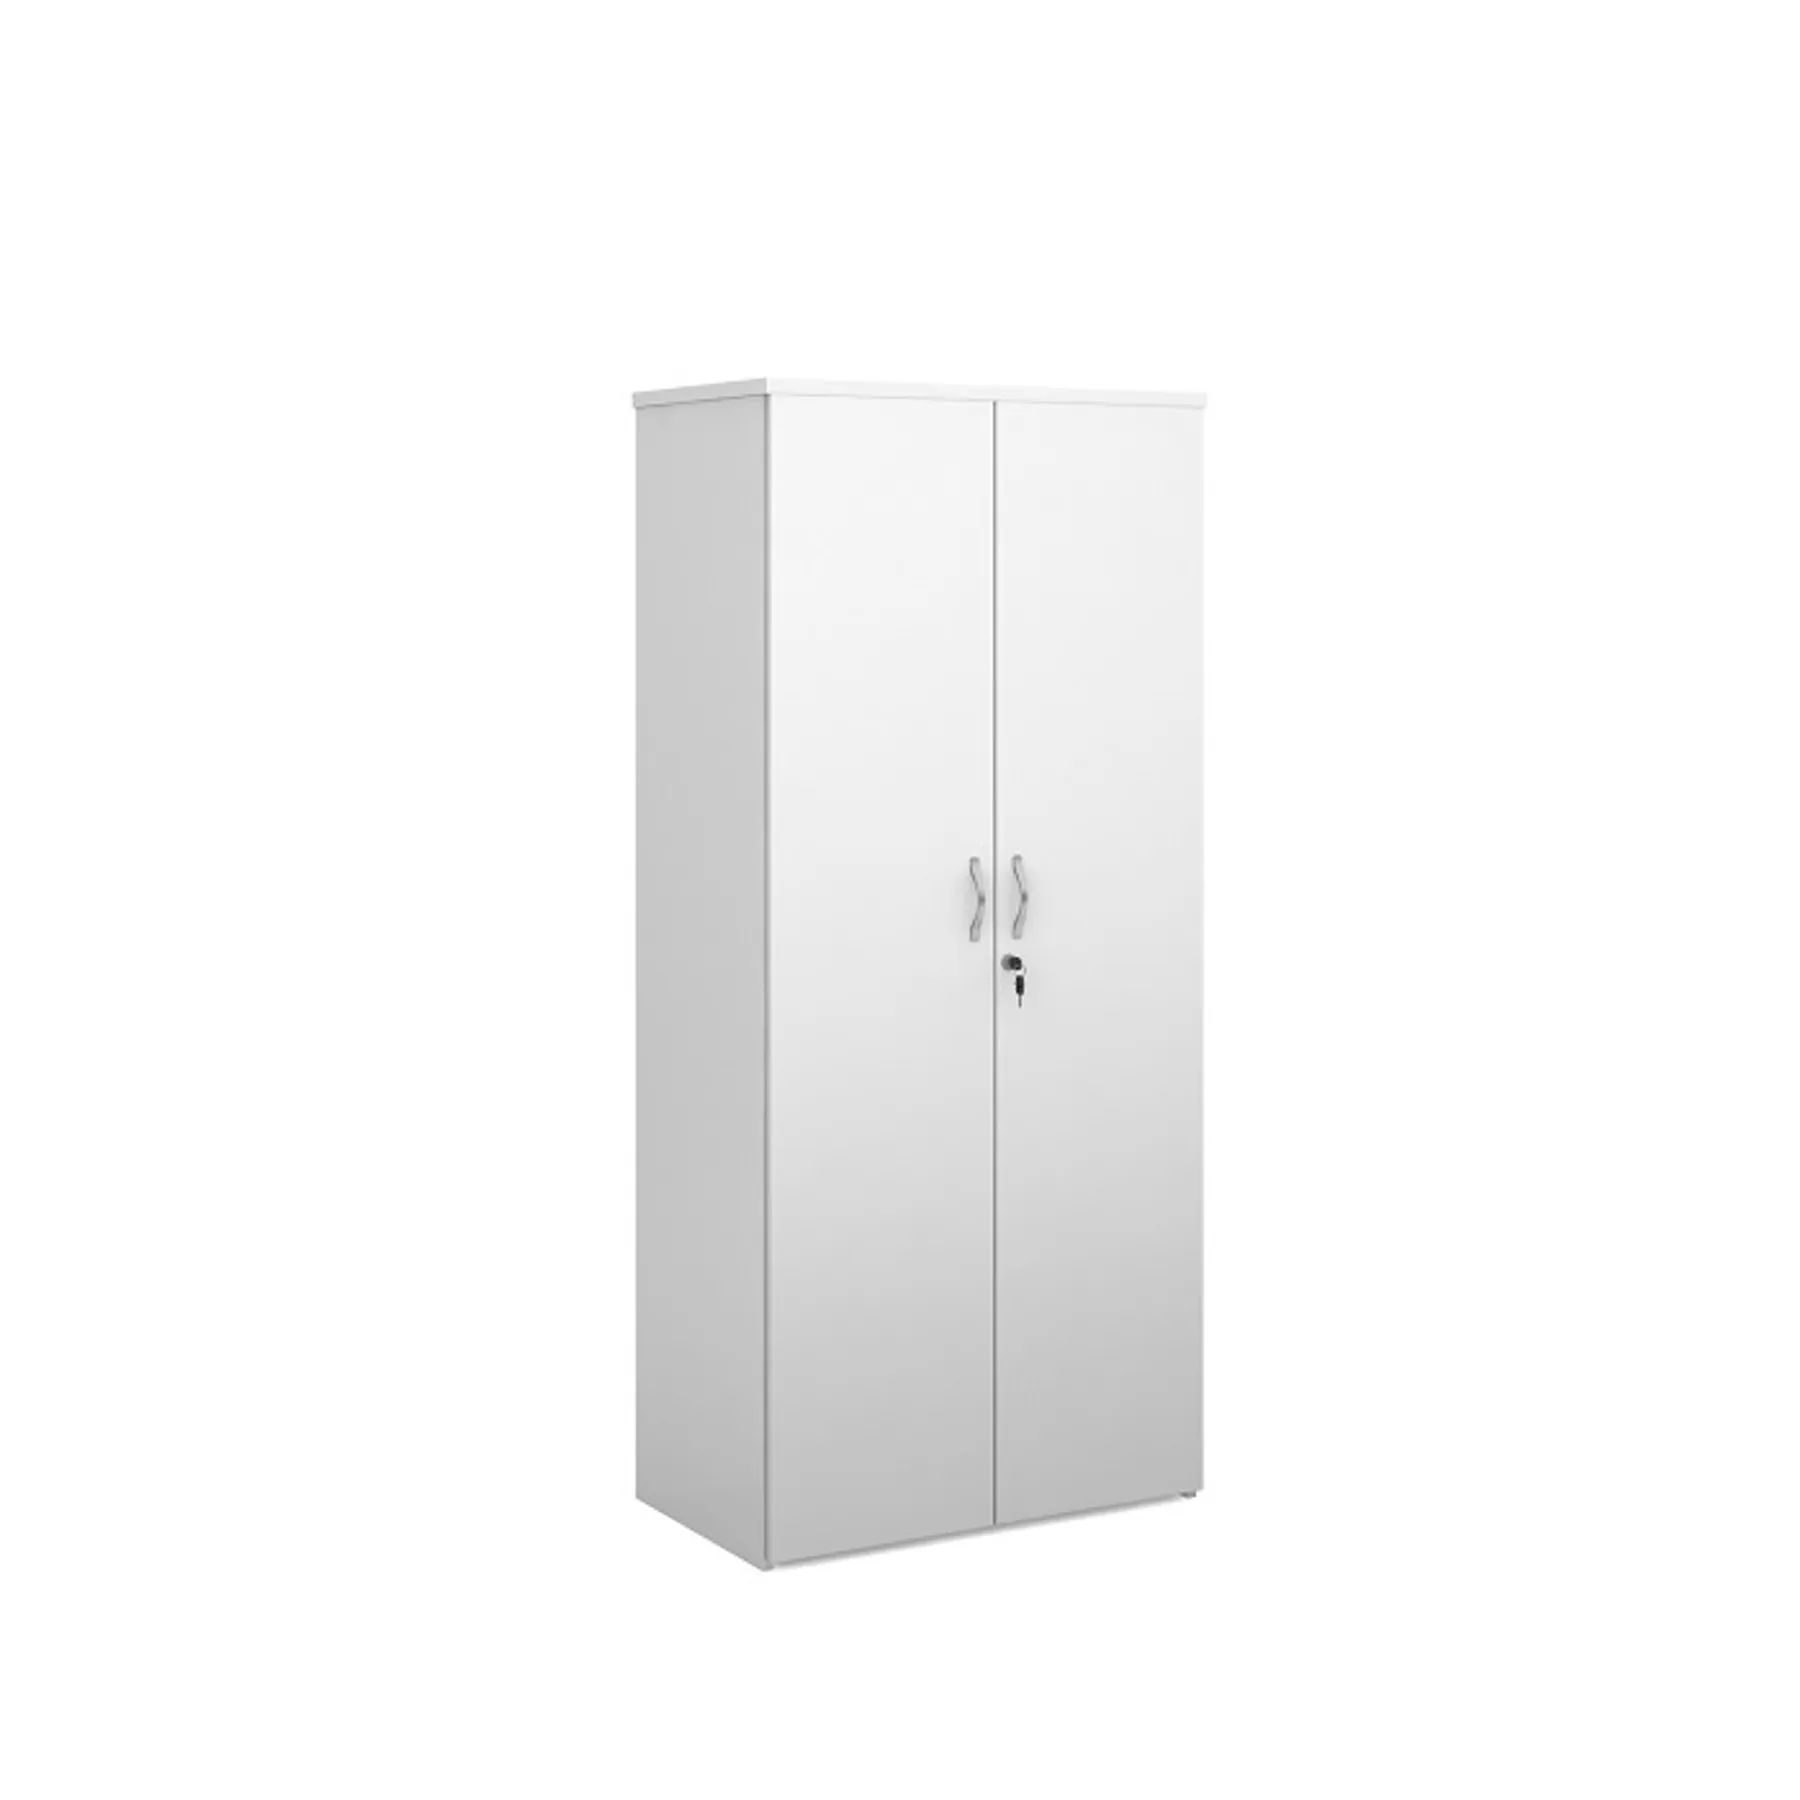 Lof direct dams cupboard 1790mm high WHITE R1790 D WH